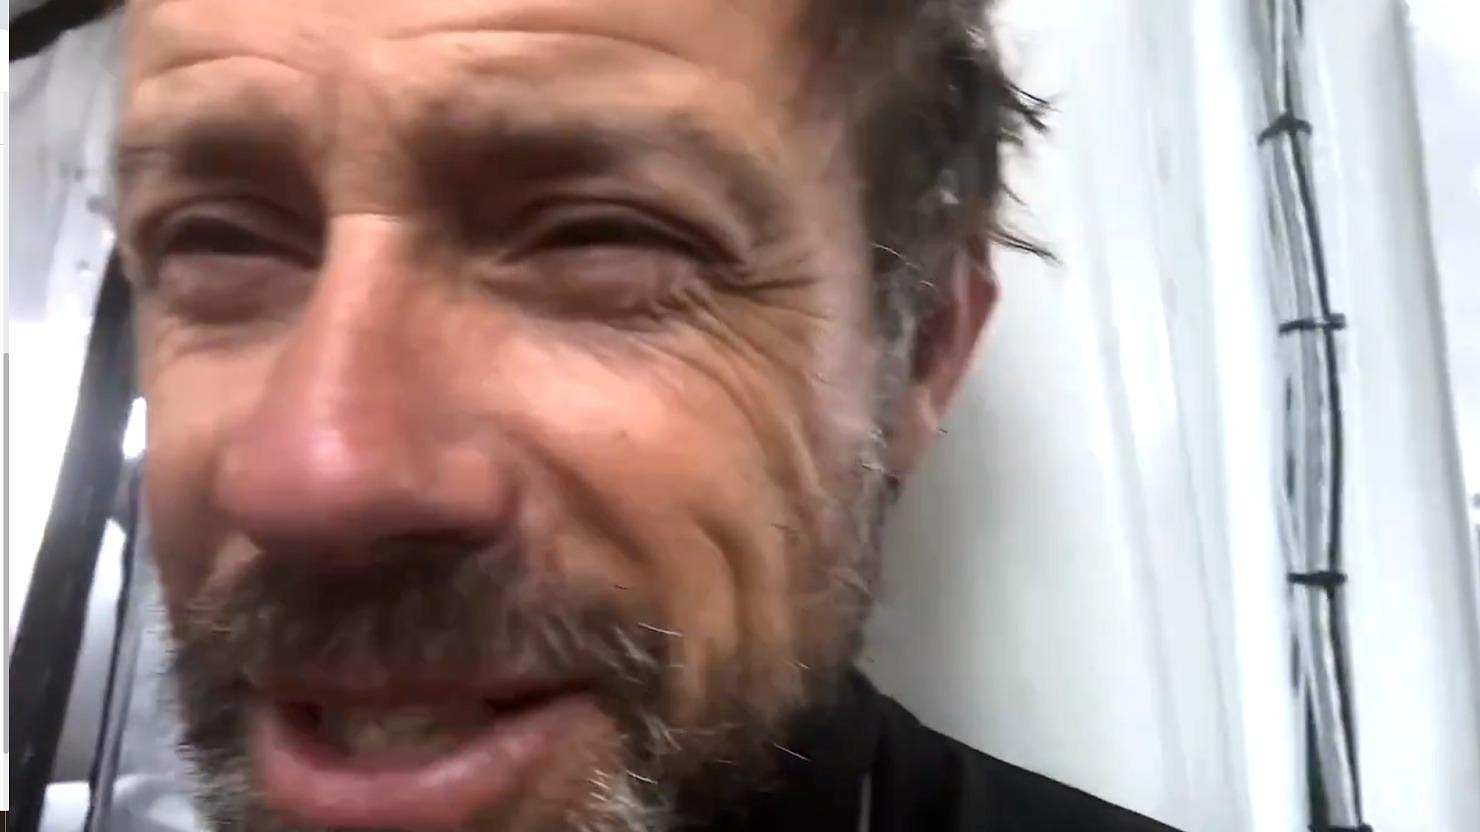 Arkéa Ultim Challenge: “We have a lot of stoned faces all the same!” laughs Coville as he passes Cape Horn